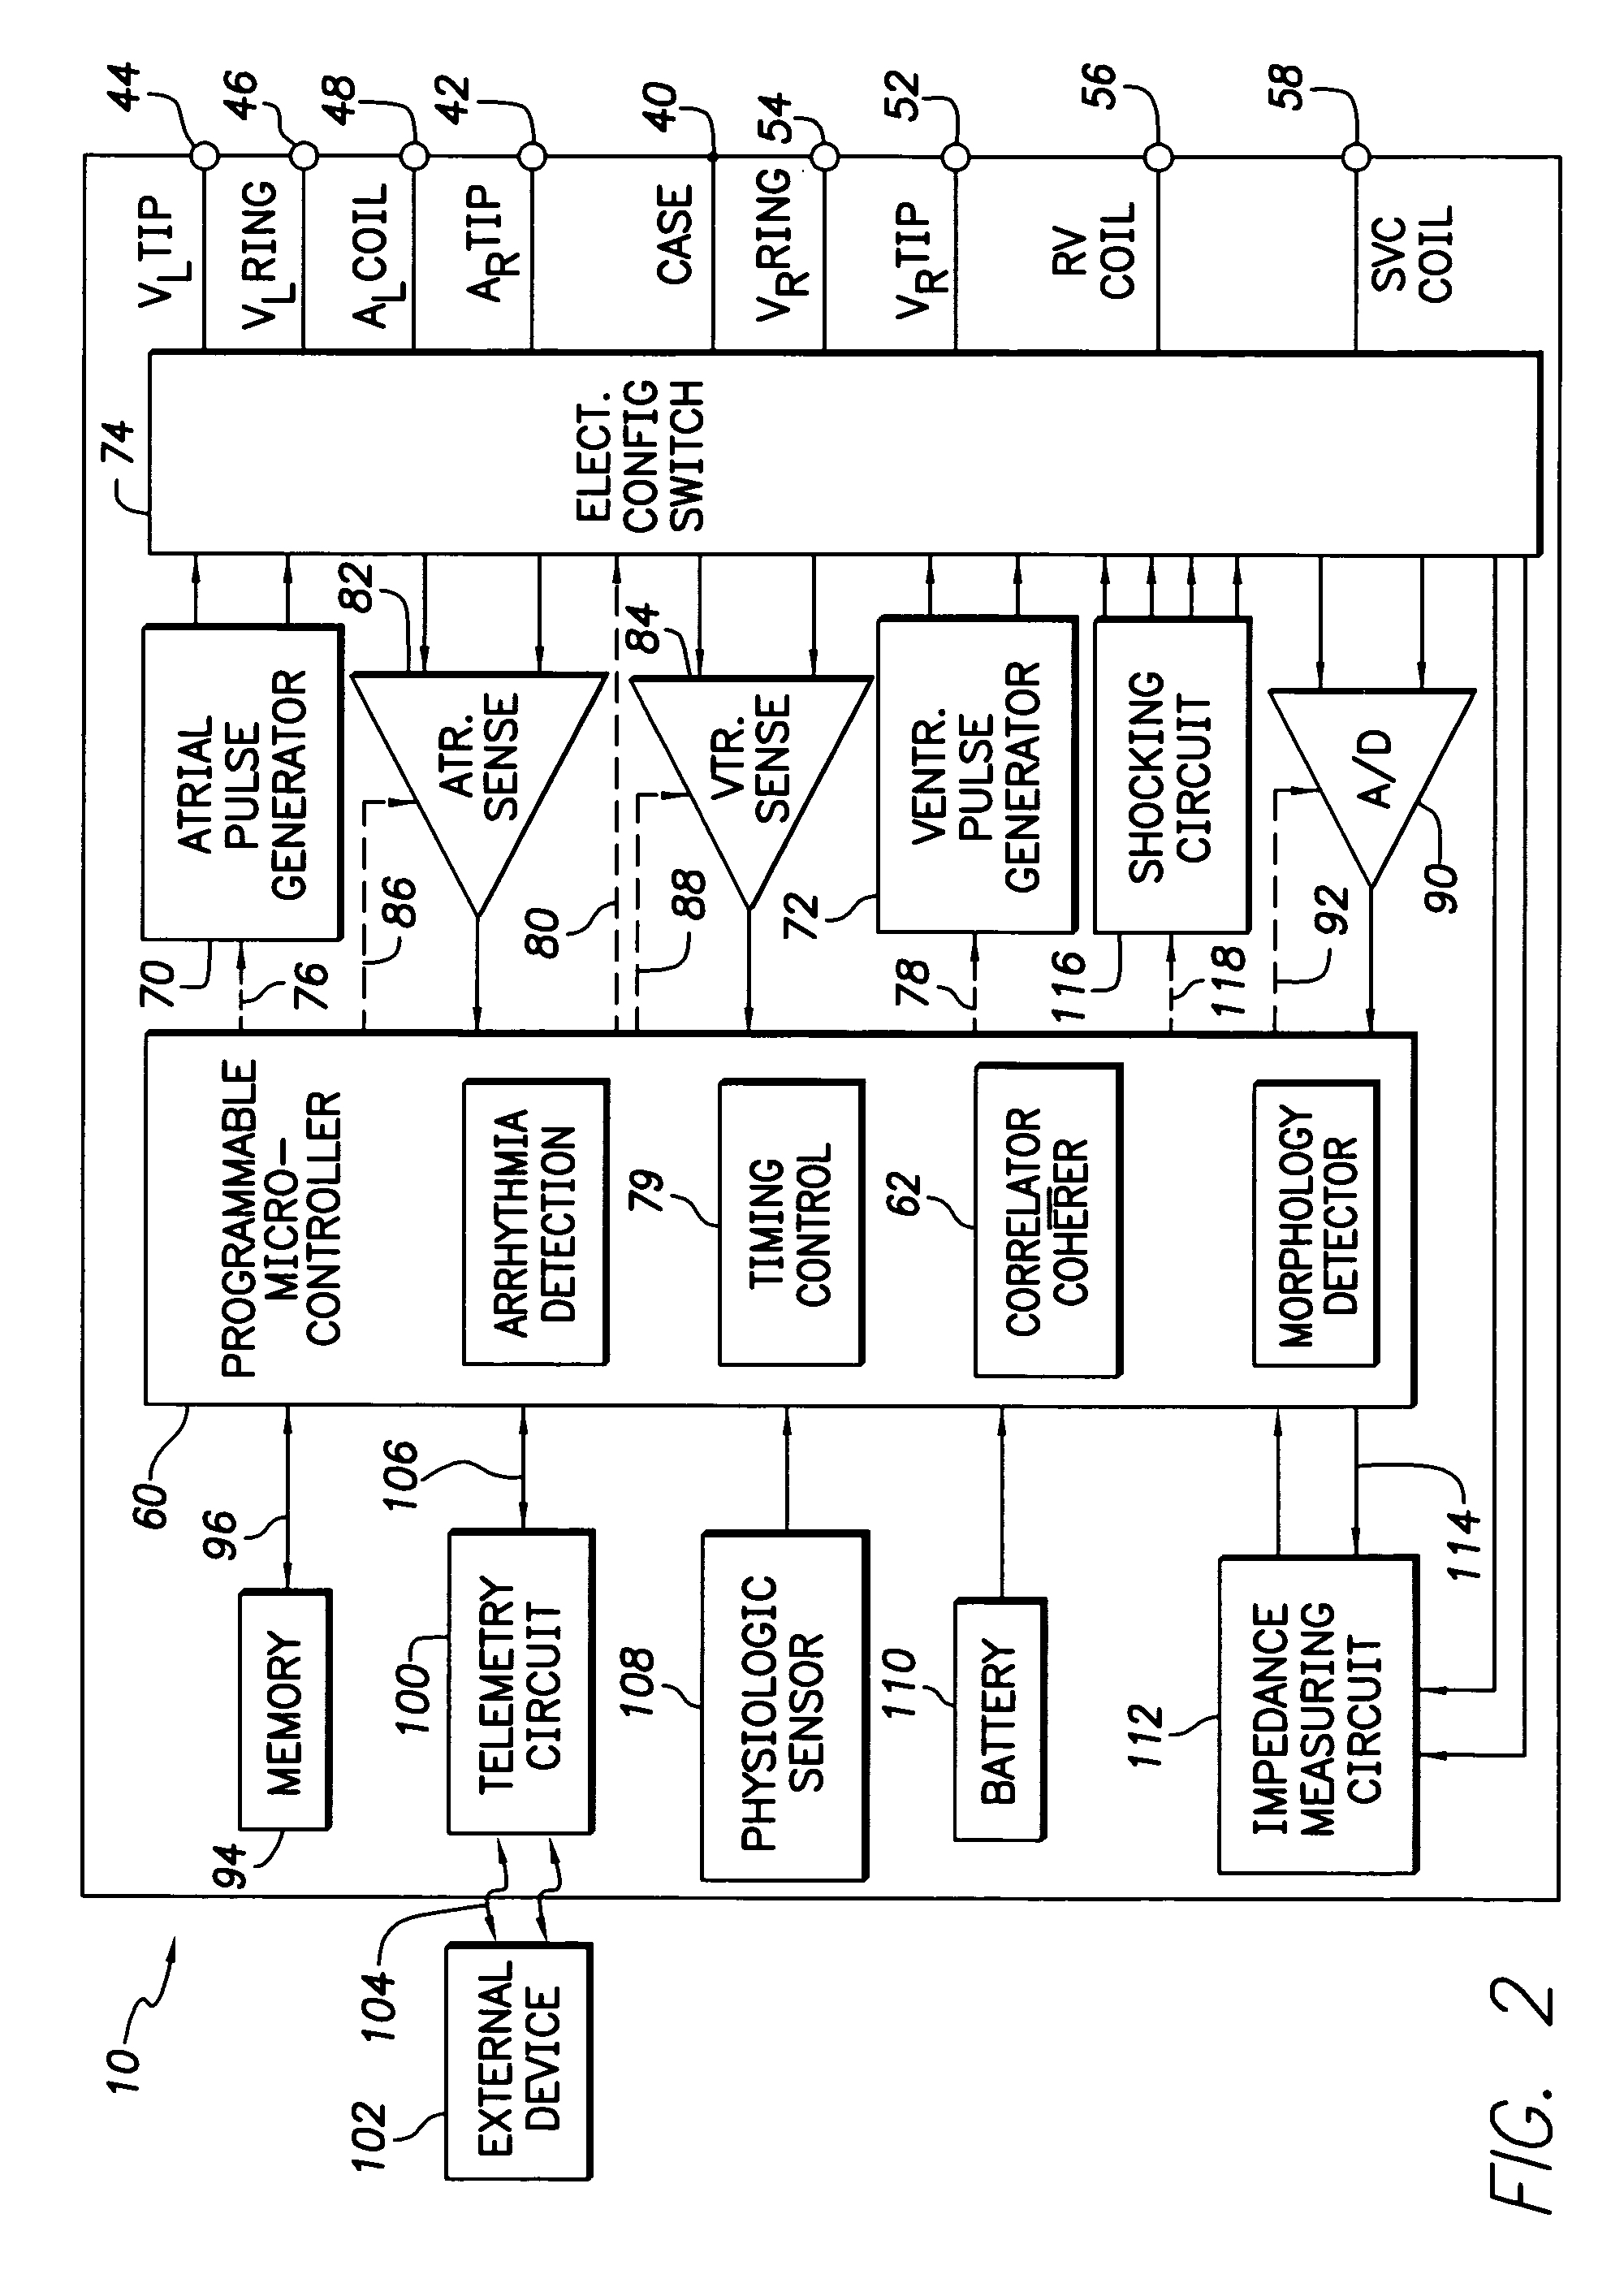 Implantable cardiac stimulation device and method that discriminates between and treats atrial tachycardia and atrial fibrillation